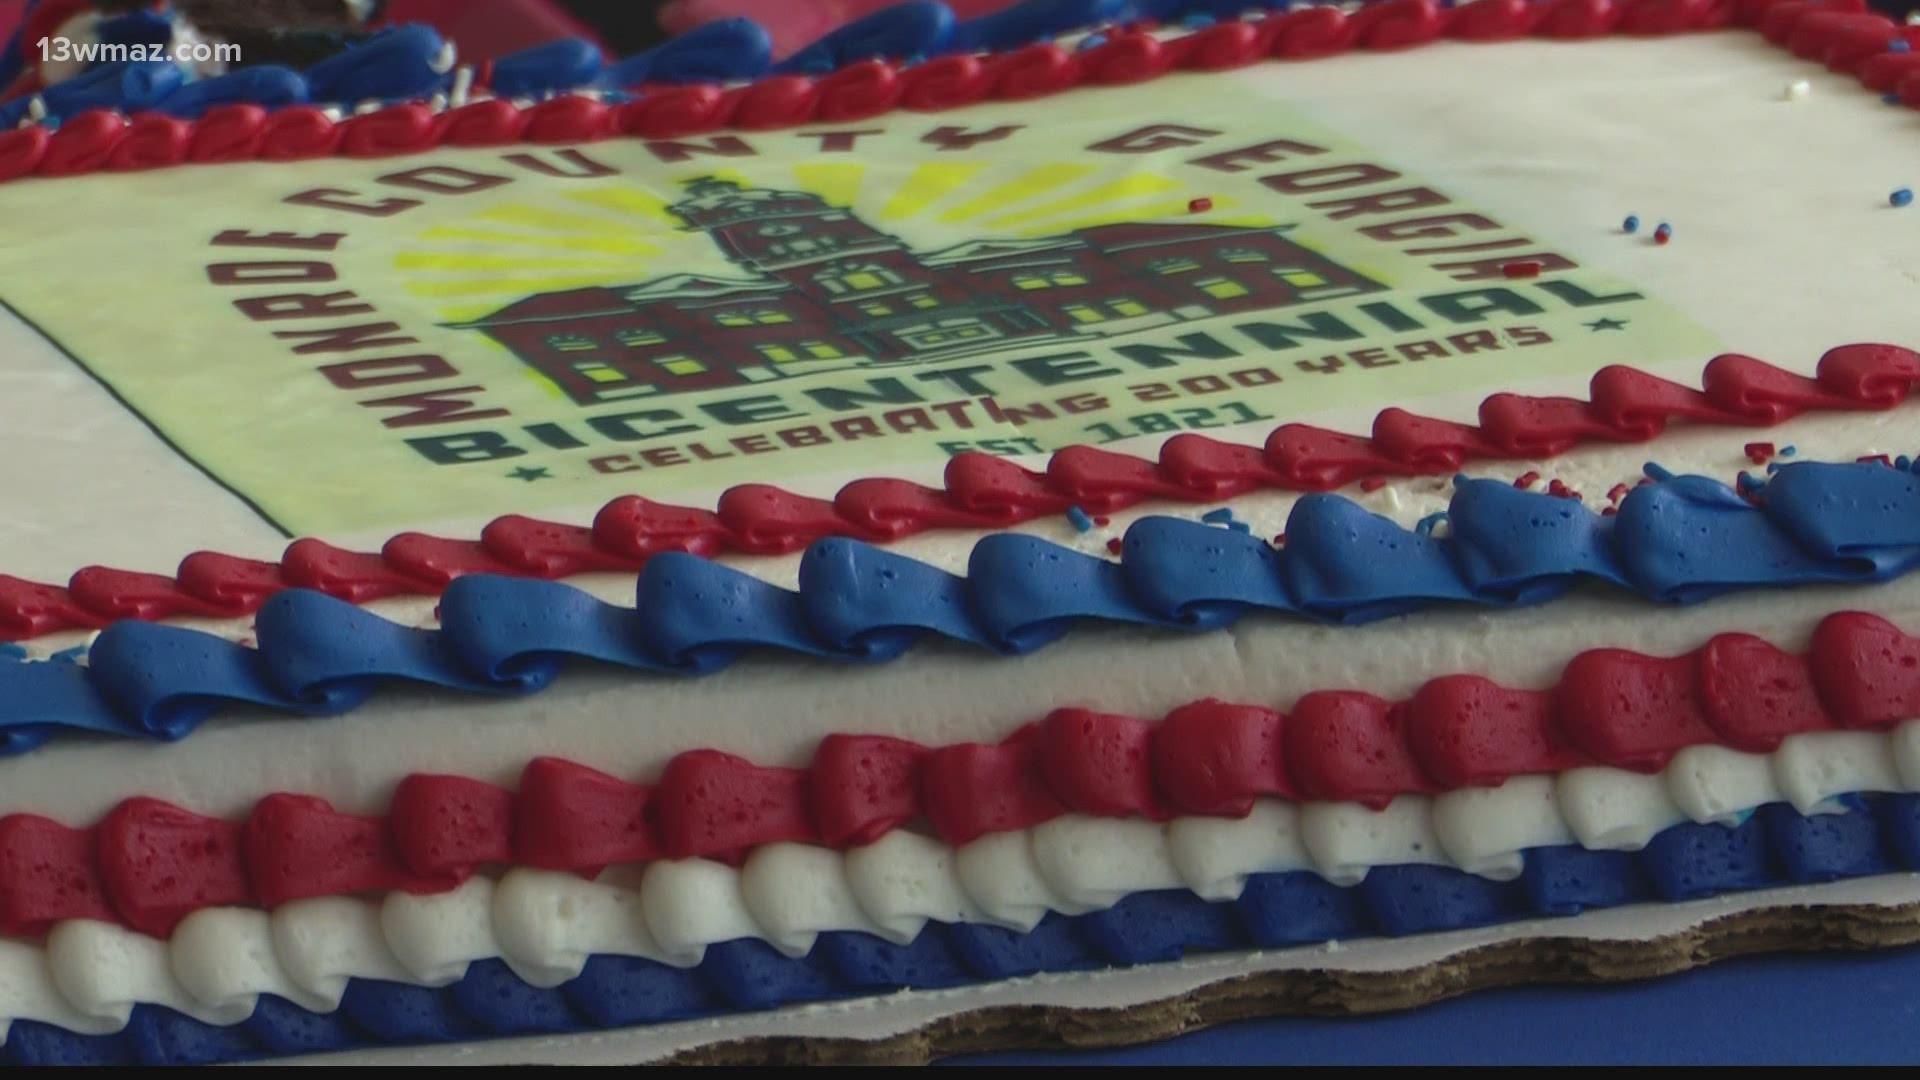 The bicentennial will continue to be celebrated throughout the year.